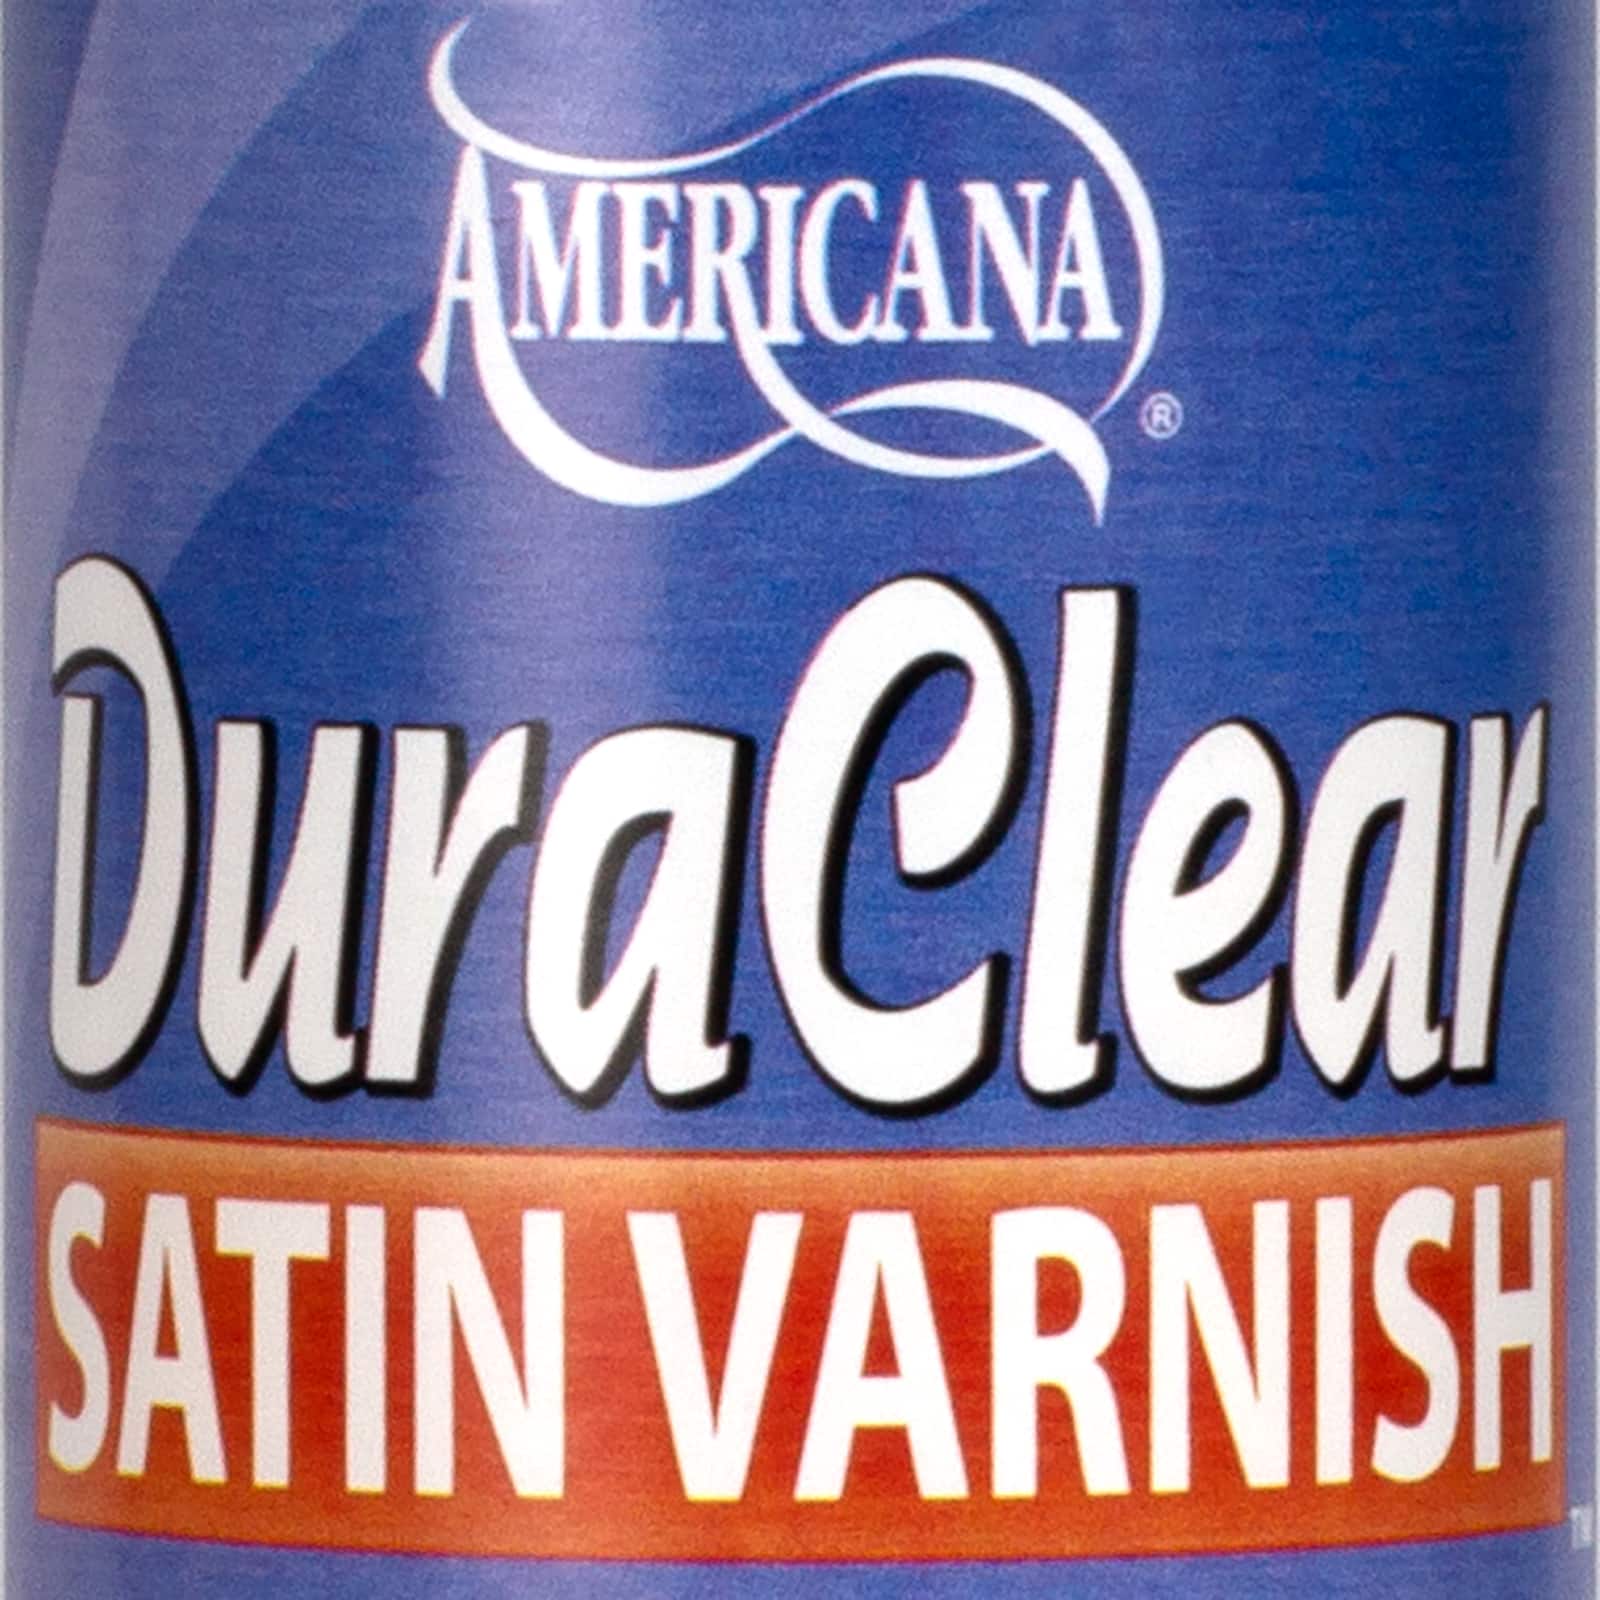 DuraClear Varnishes 8oz - Wildwood Art & Crafts